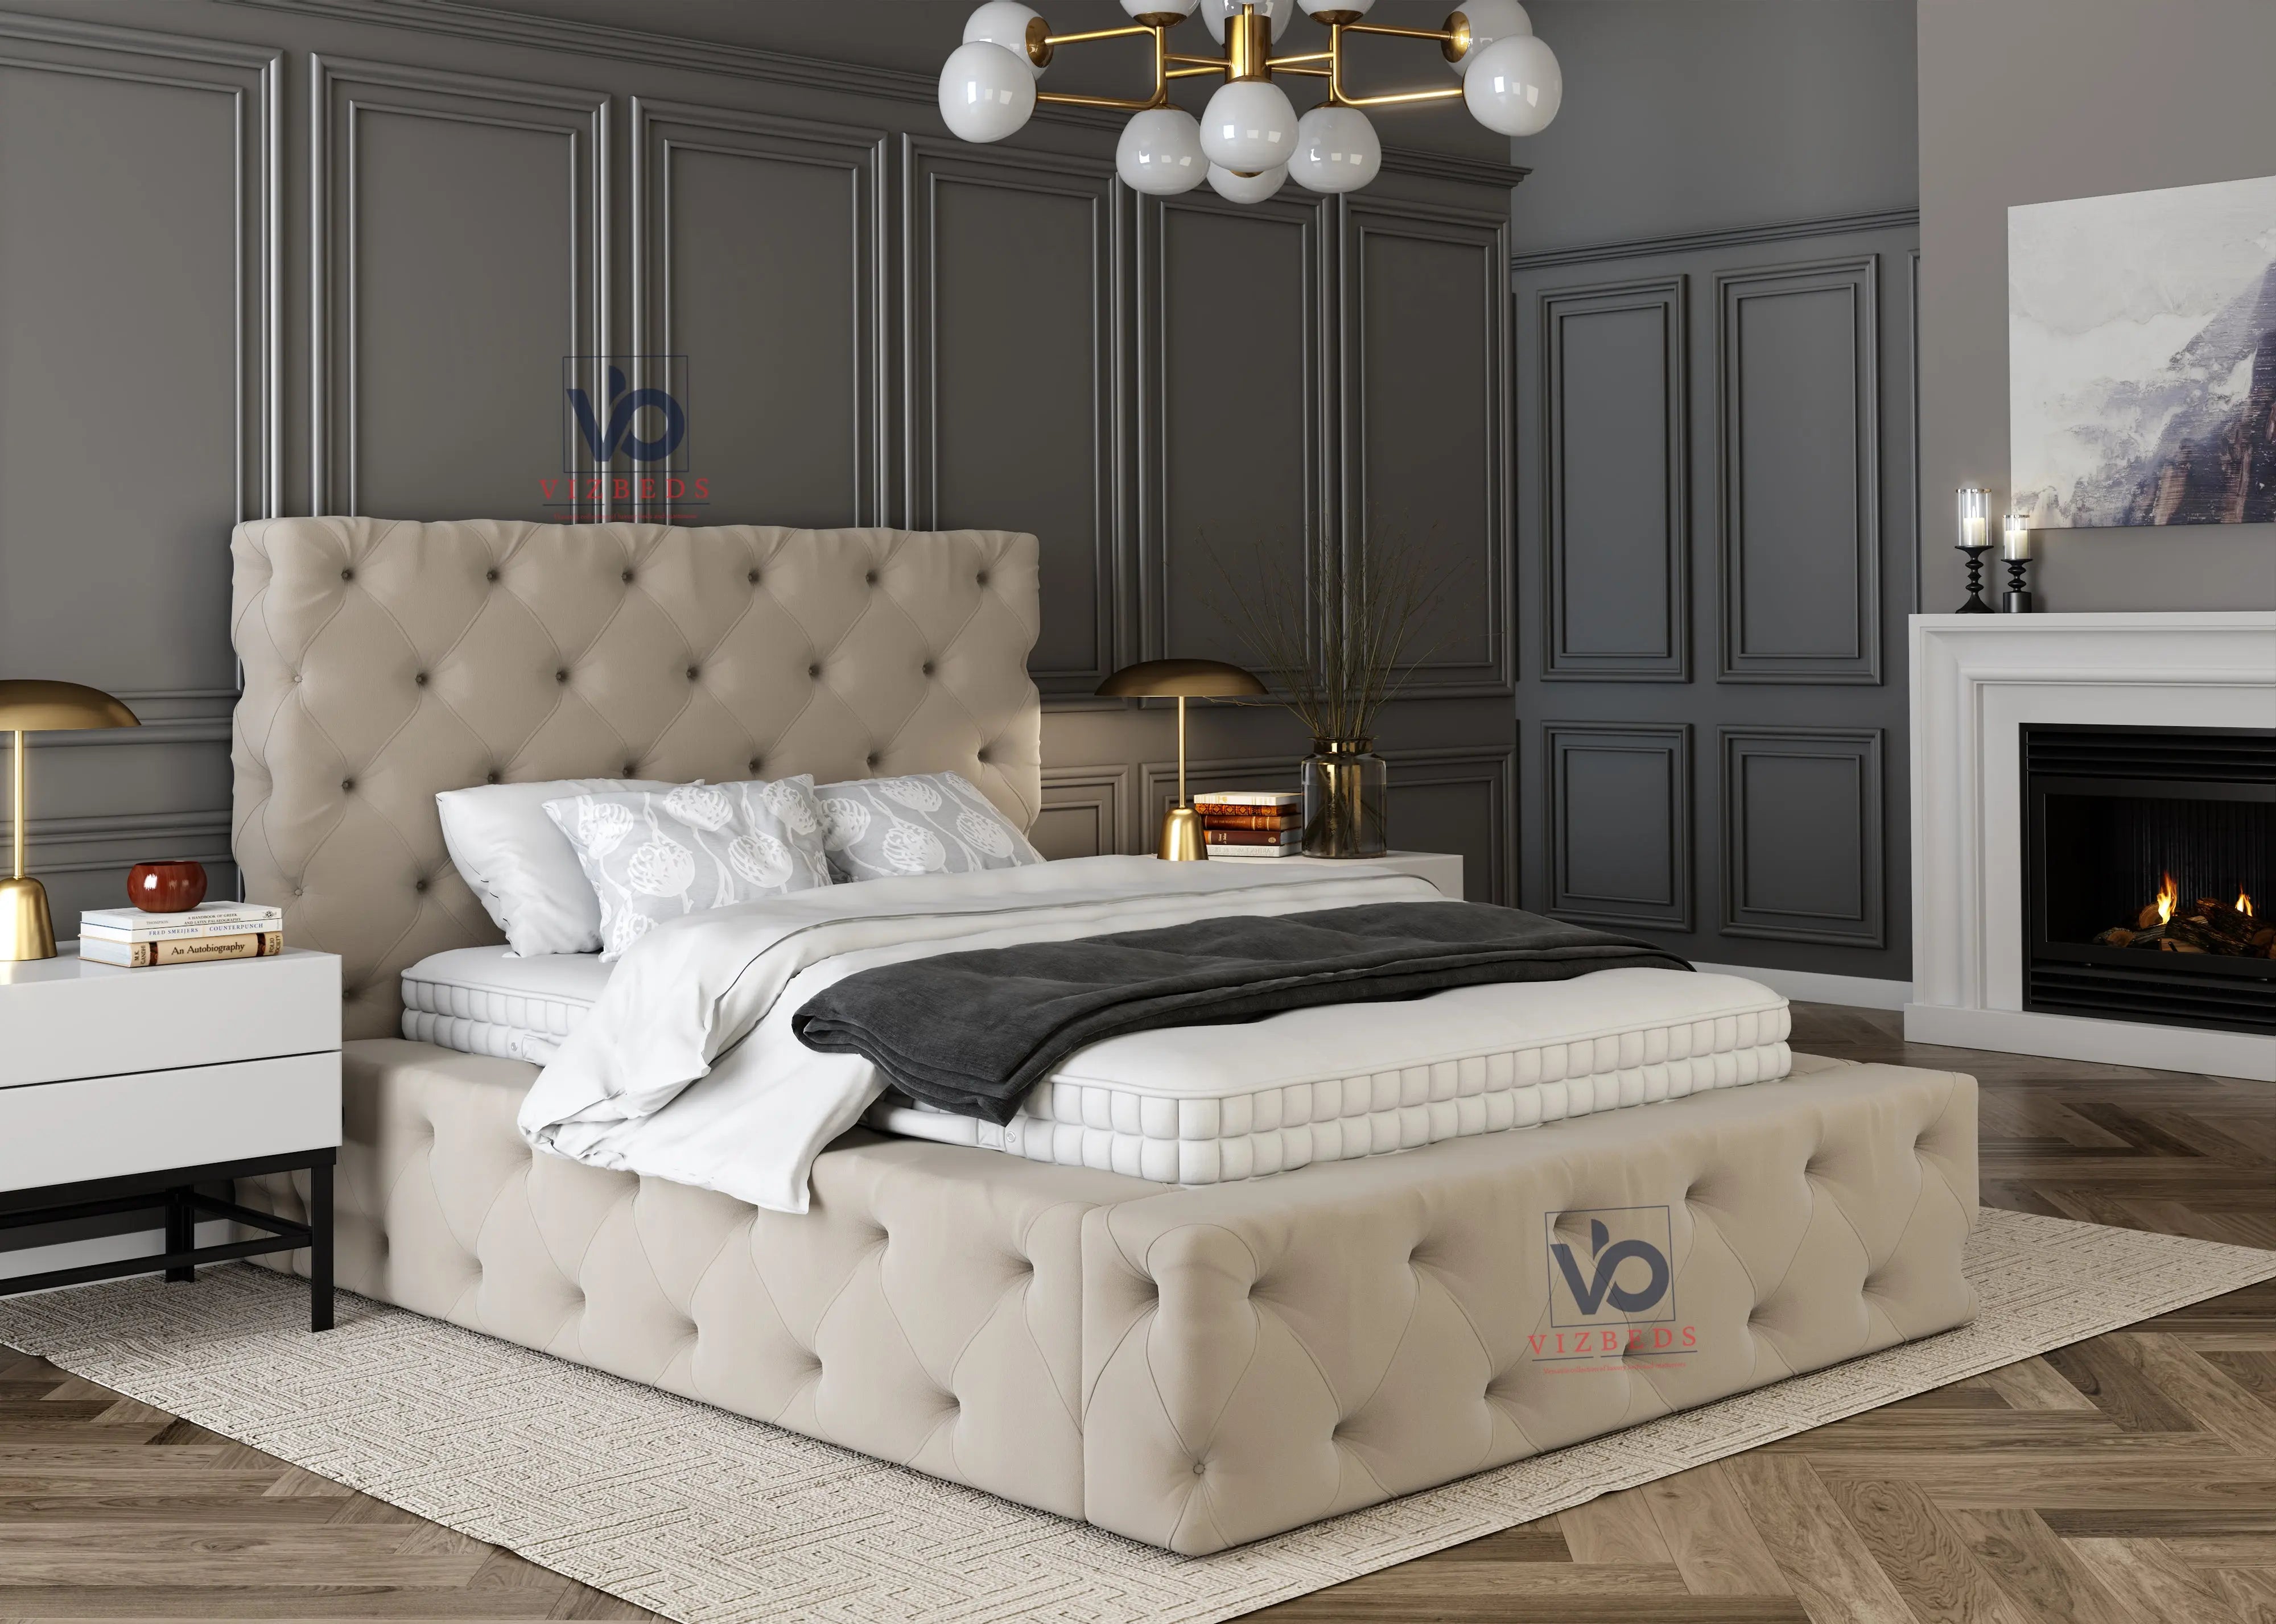 Tufted Chesterfield Ottoman  Bed With Headboard